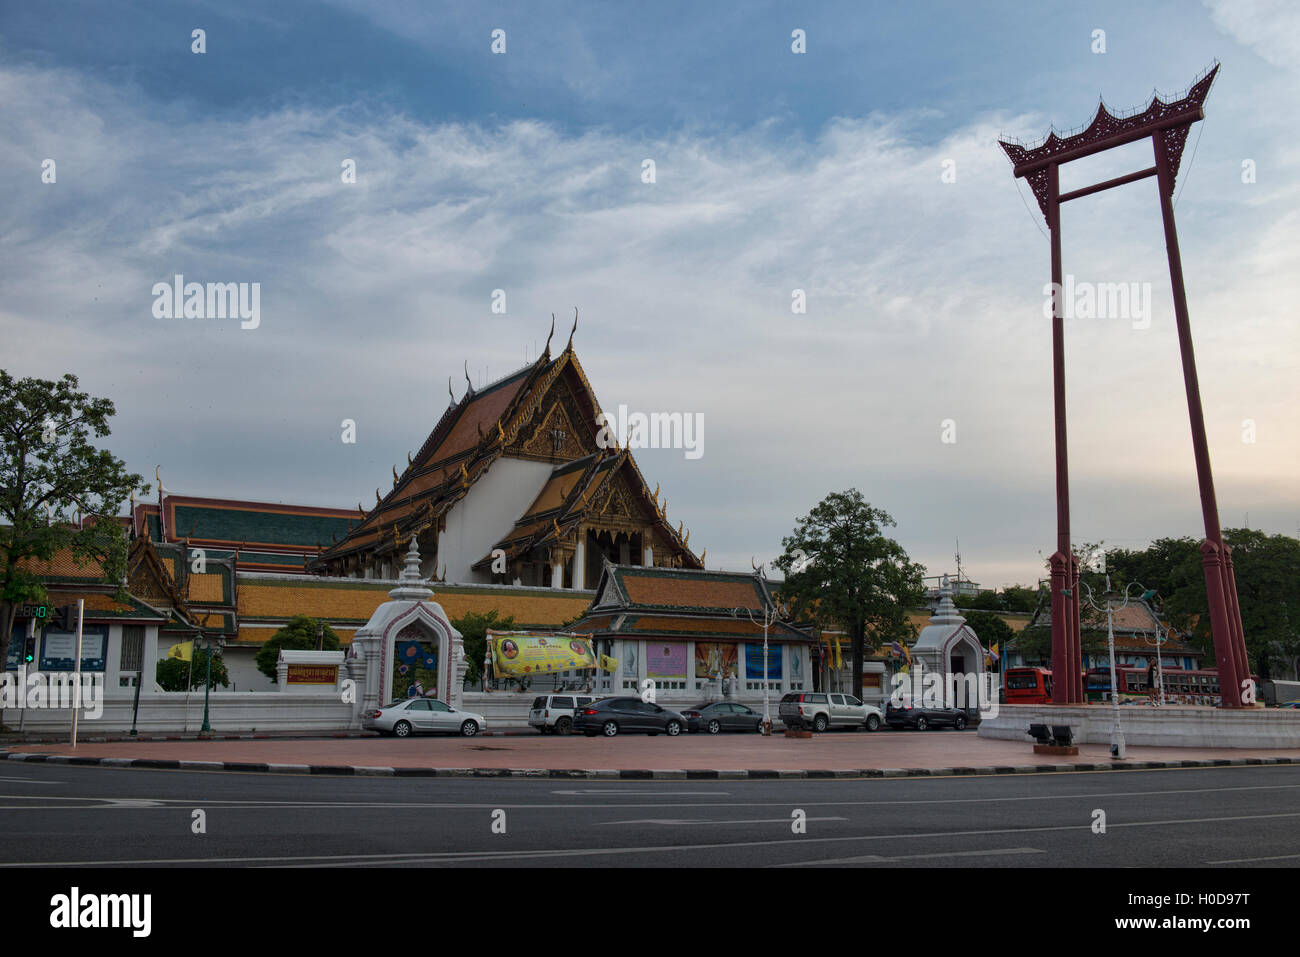 The Giant Swing and Wat Suthat, Bangkok, Thailand Stock Photo